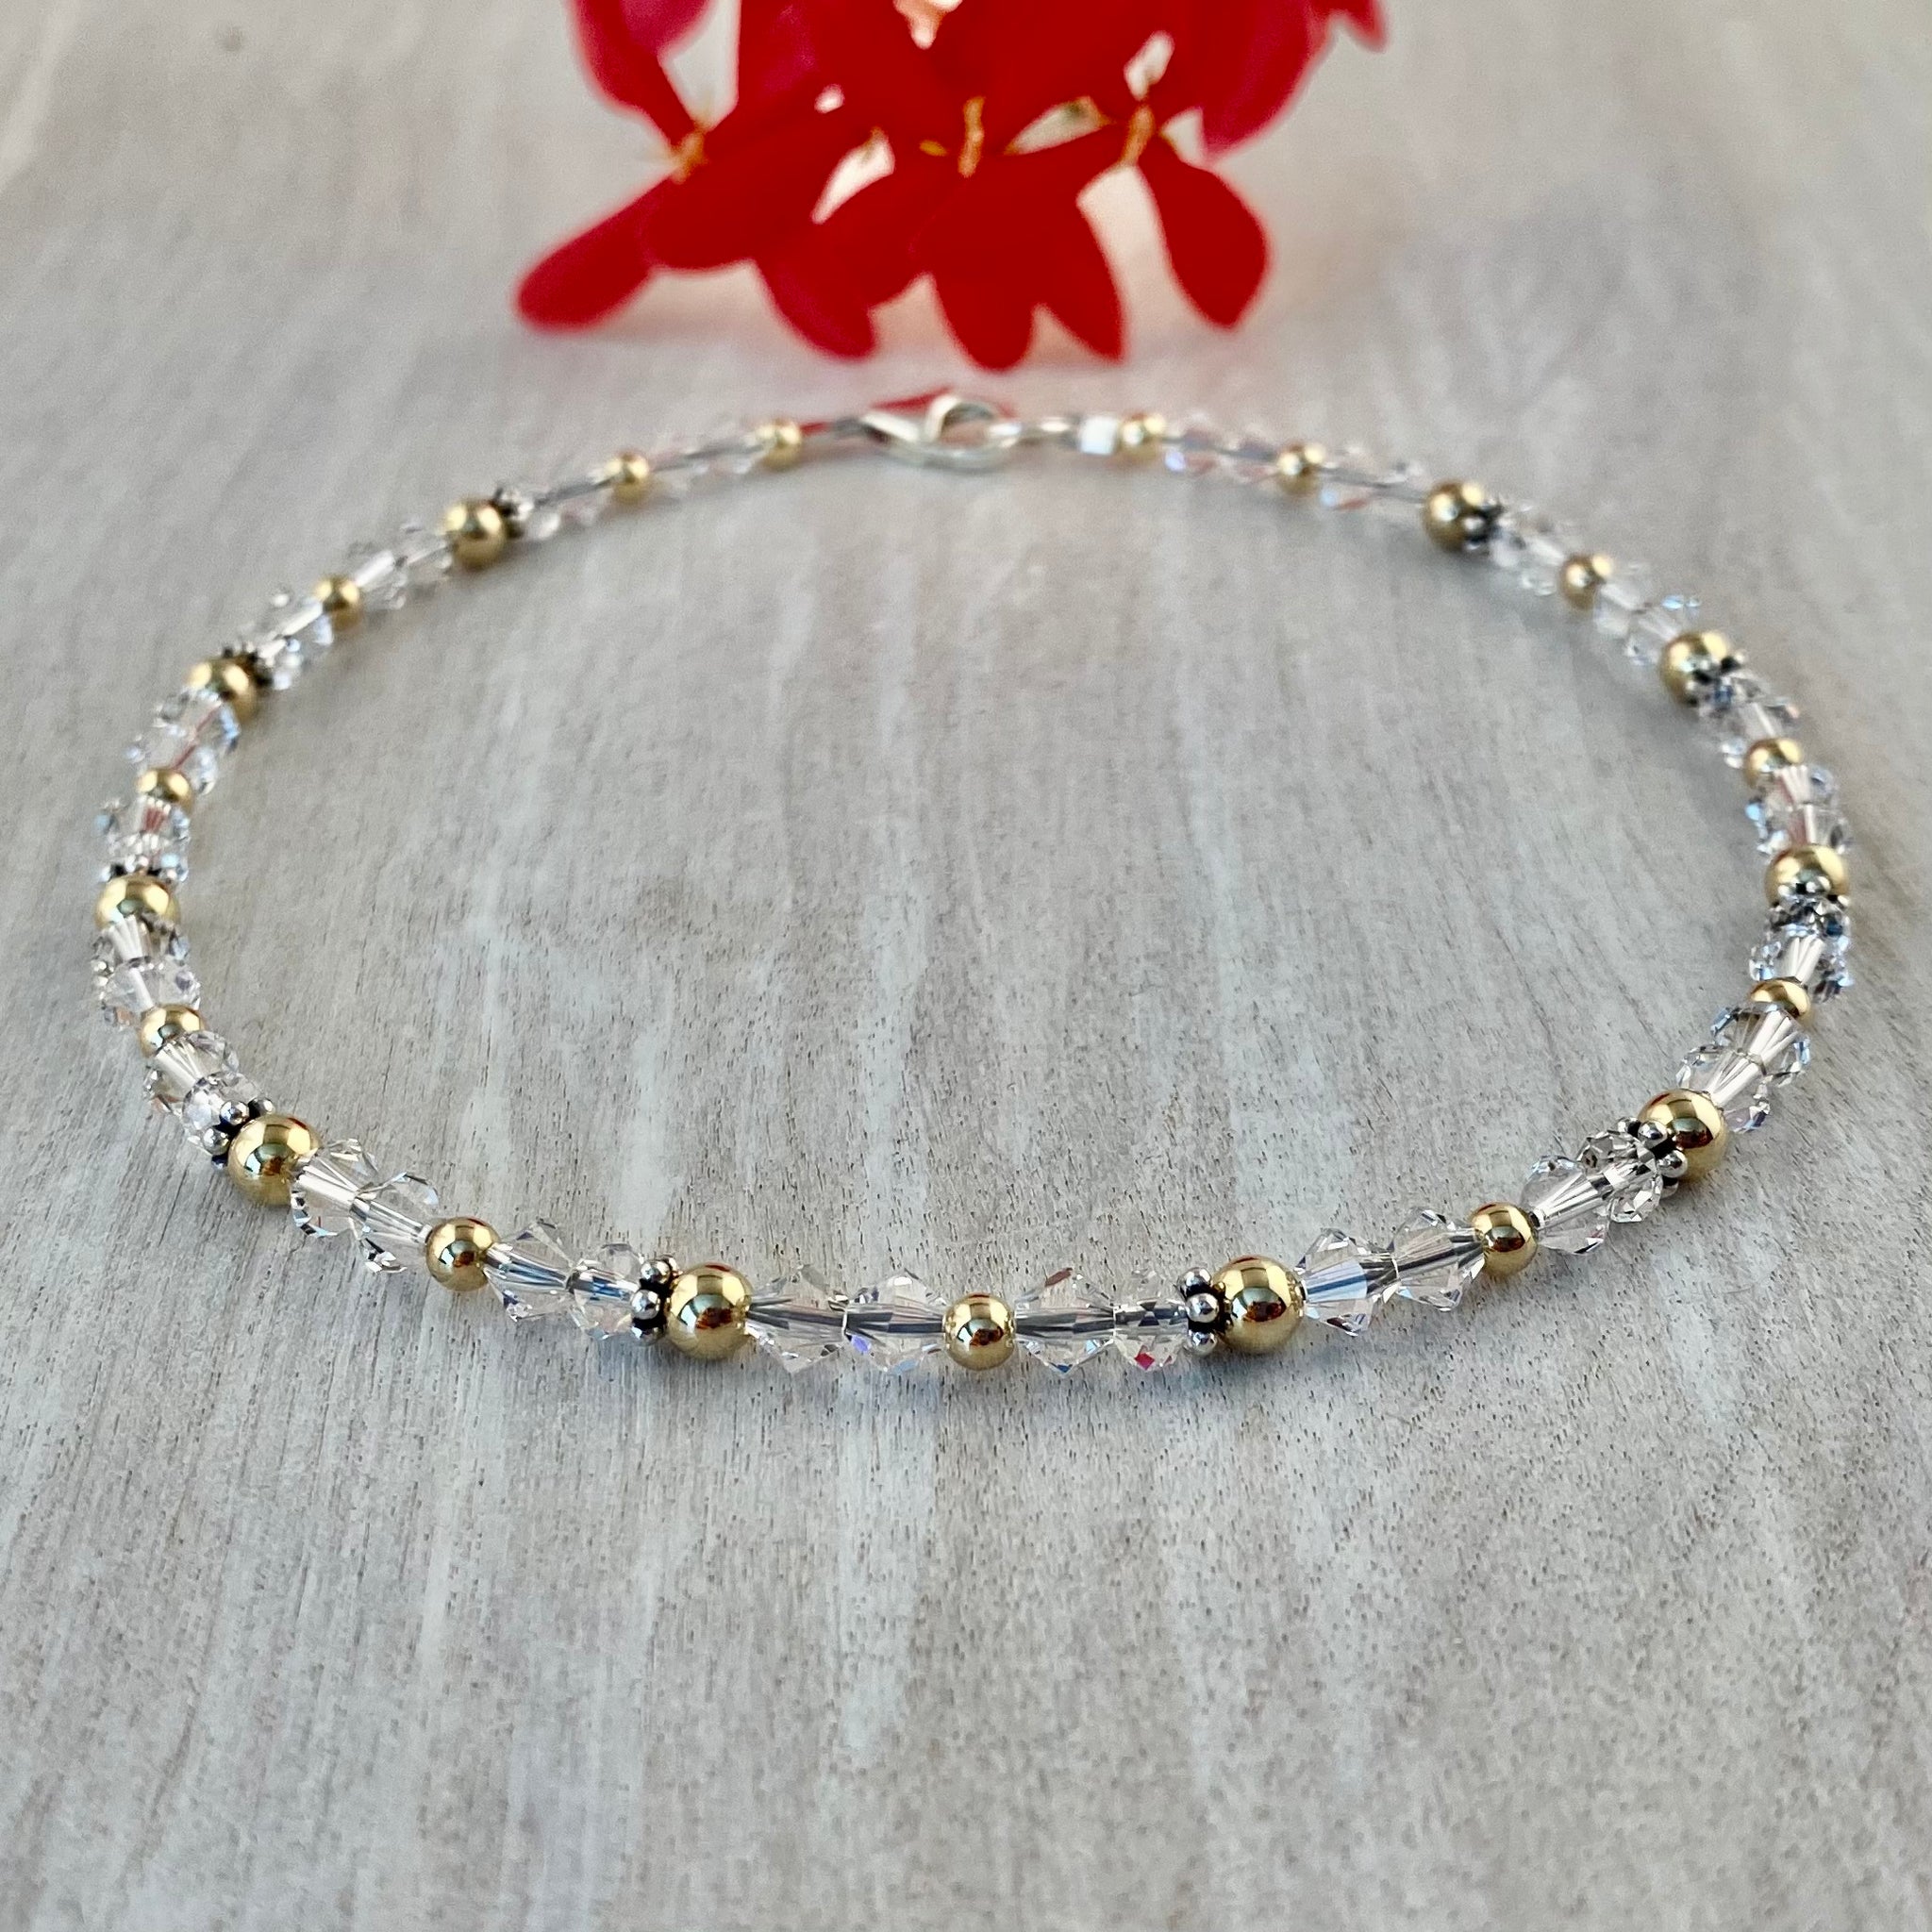 4mm Clear Swarovski Crystals with 14k Gold-filled Beads Anklet